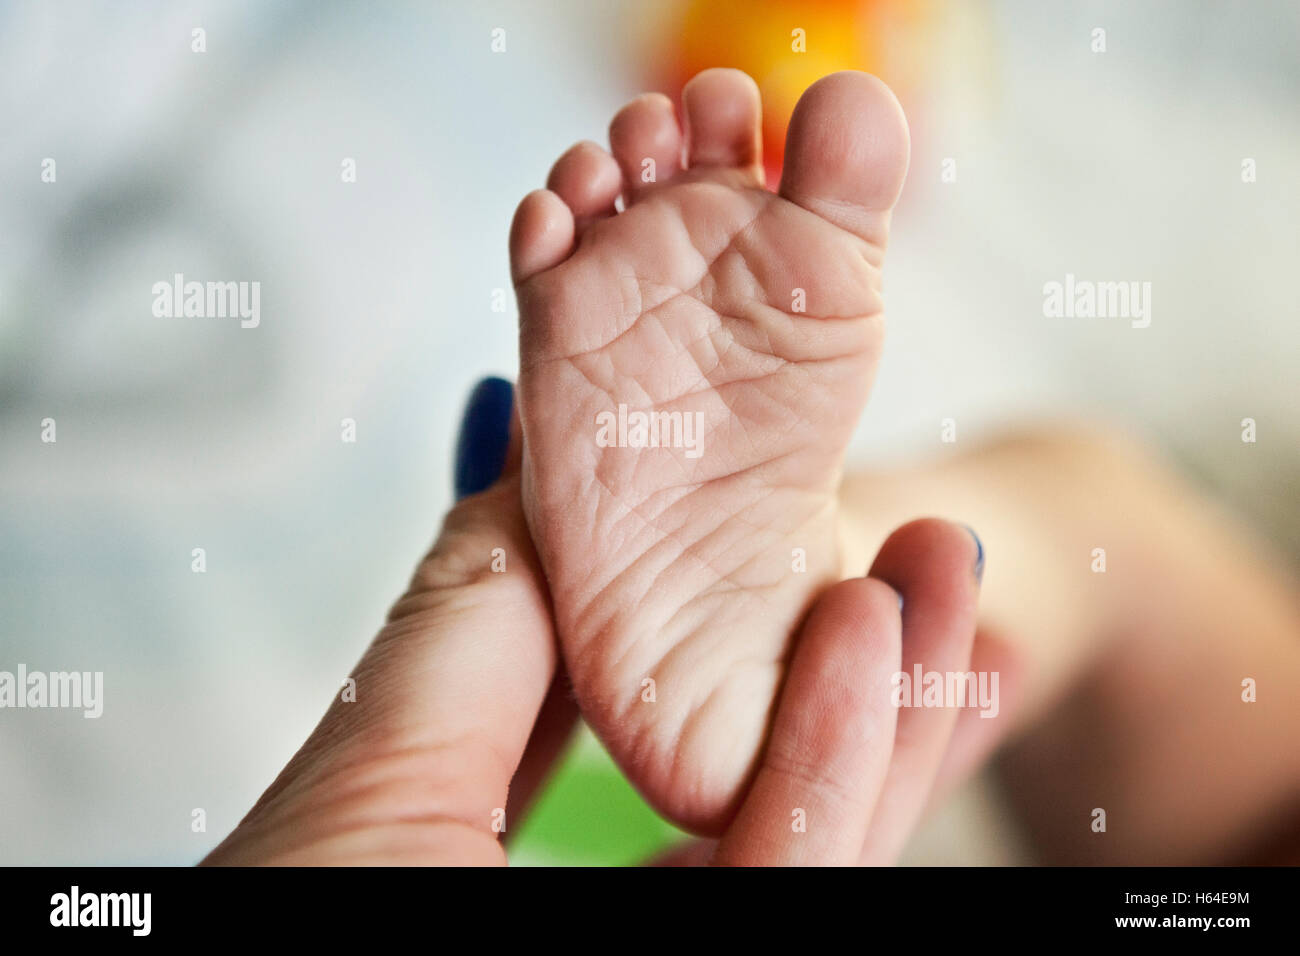 Hand holding baby's foot Stock Photo